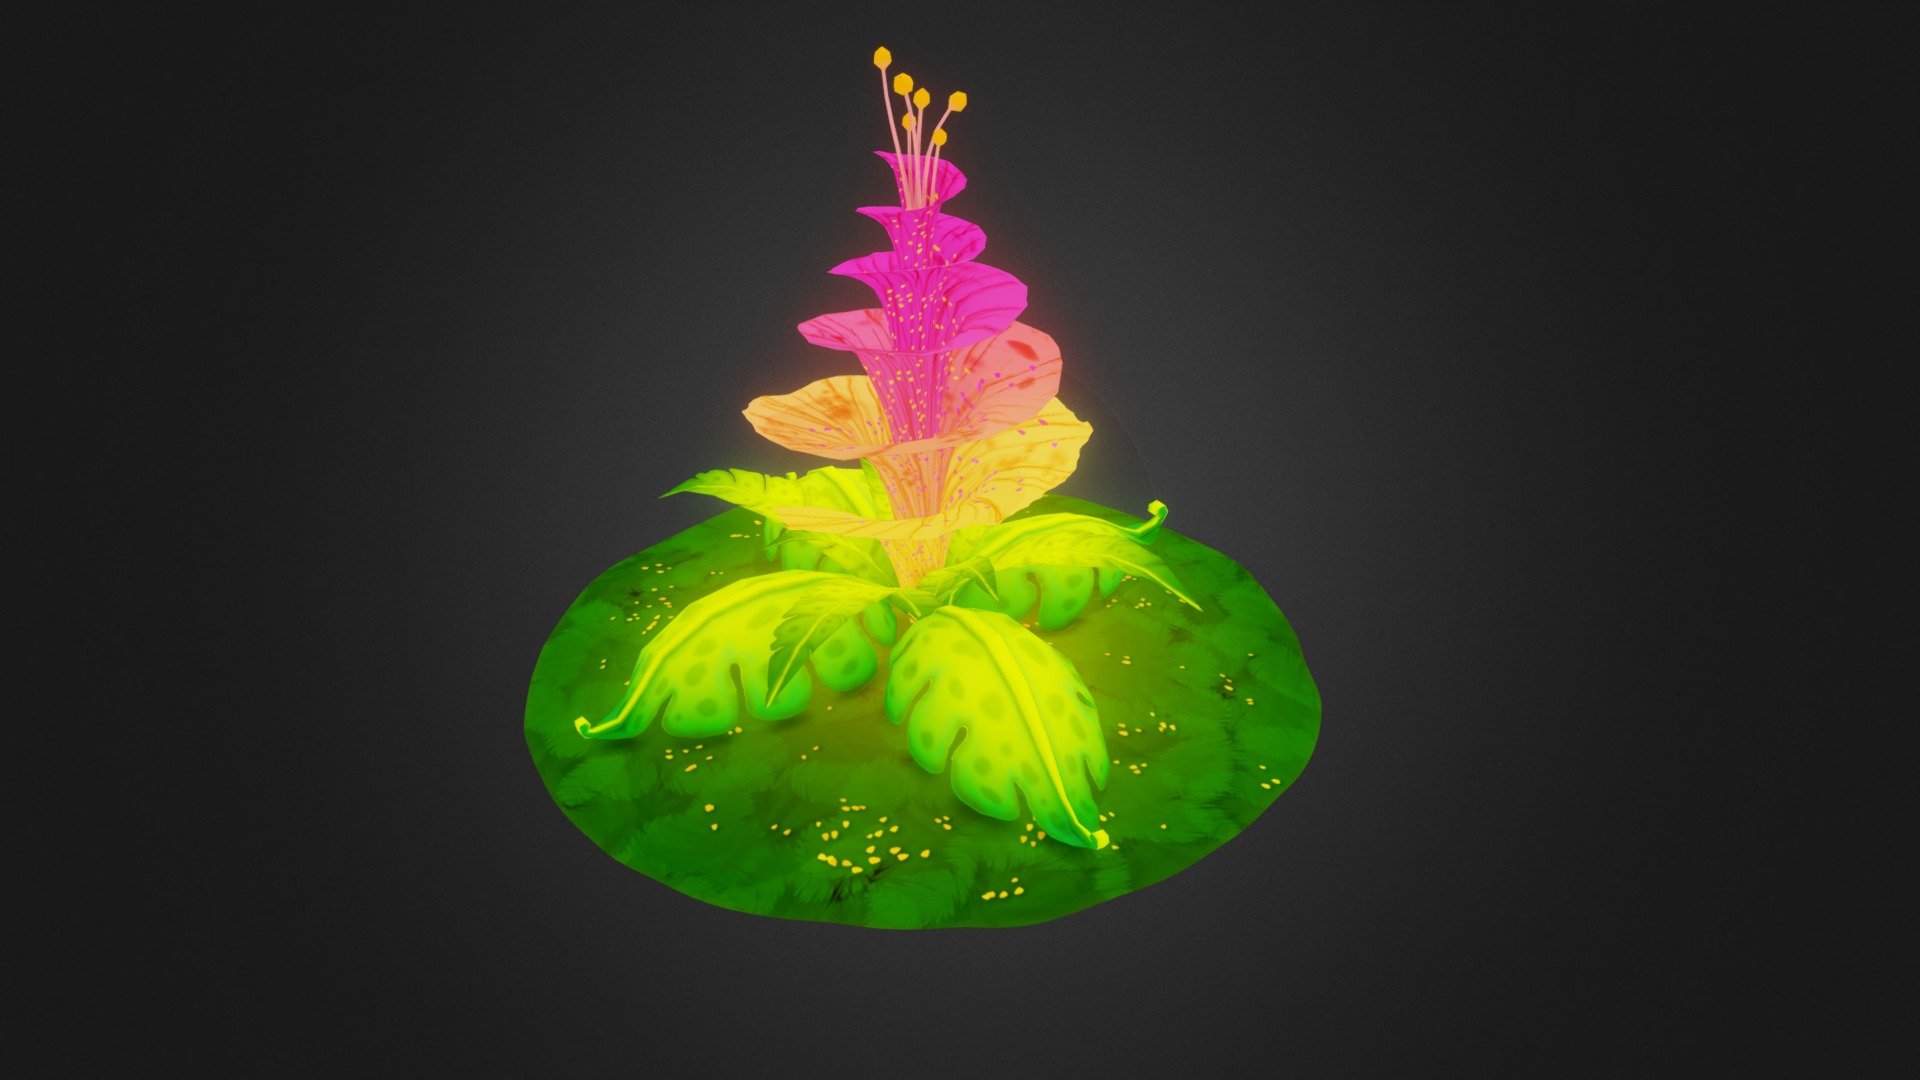 Used Blender with KRITA to create this stylized flower. 3d model